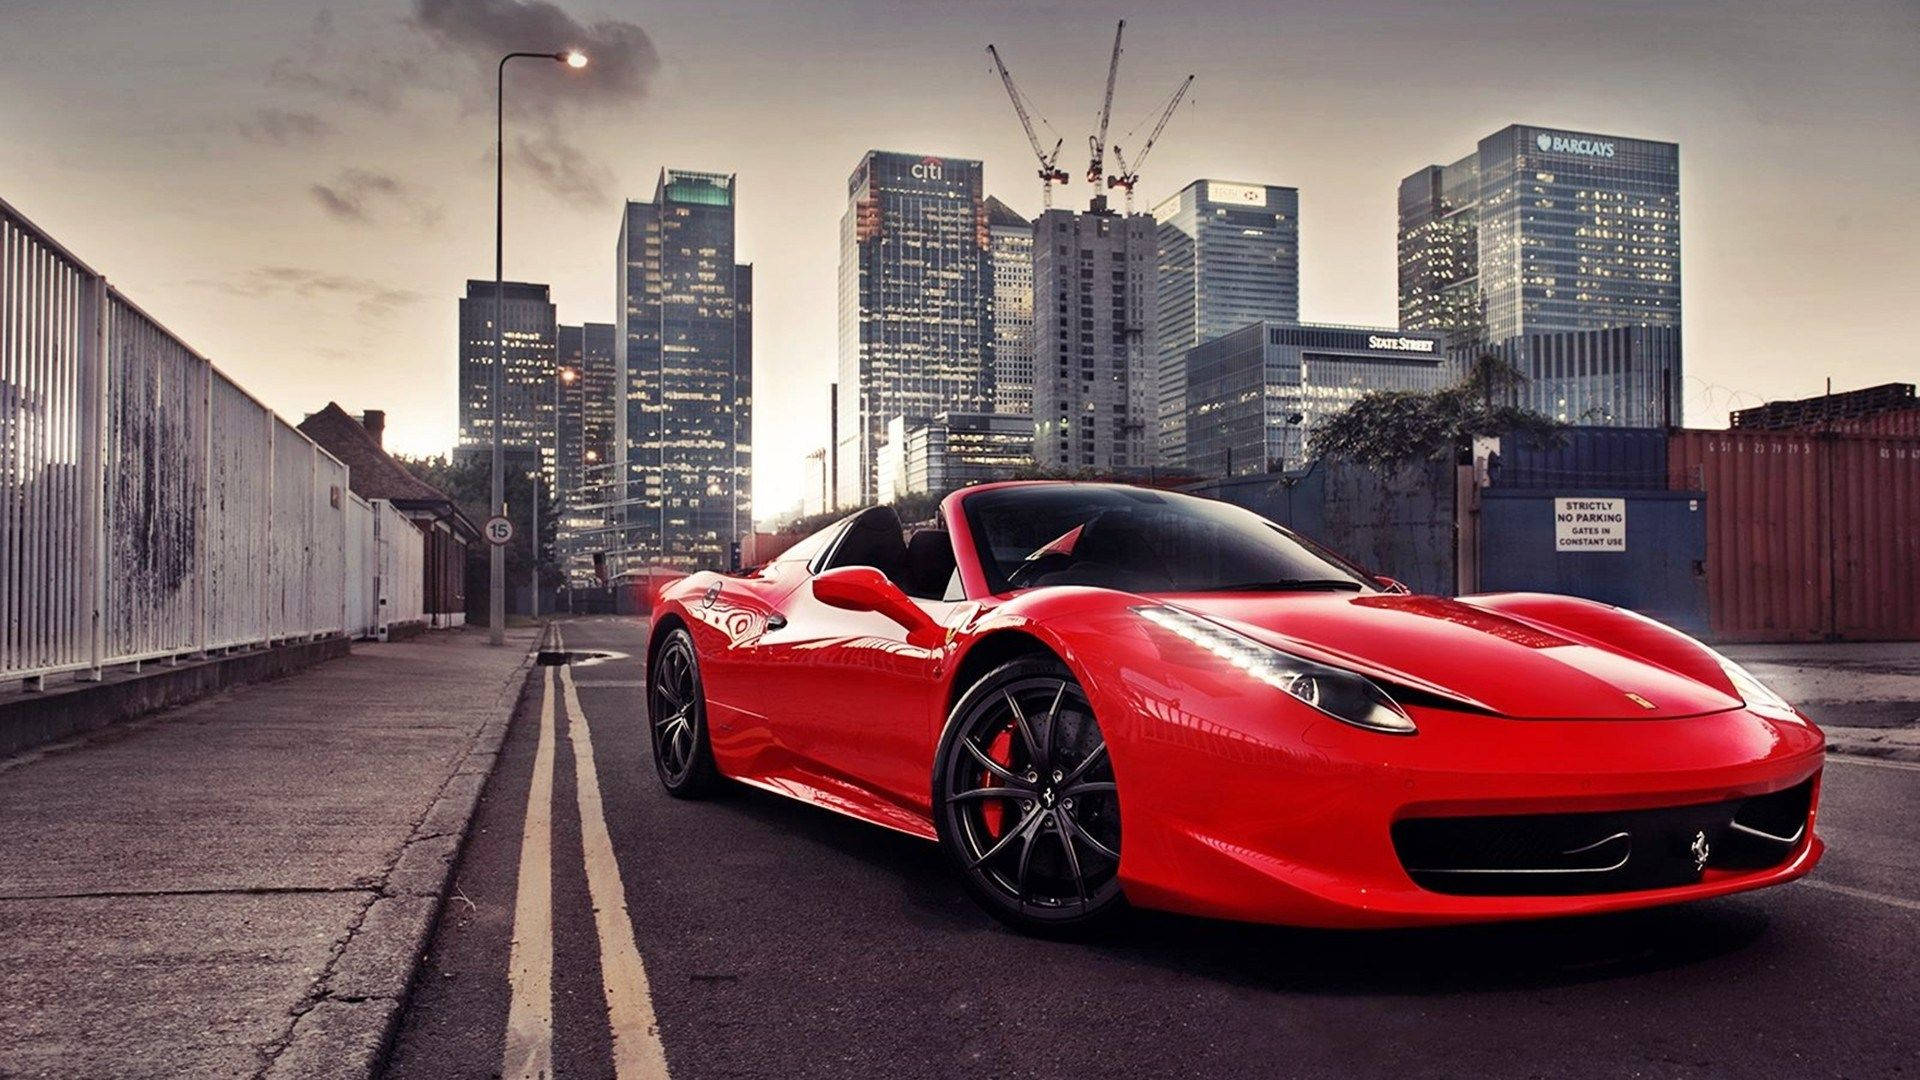 "The Stylish and Iconic Ferrari 458 on the Street" Wallpaper